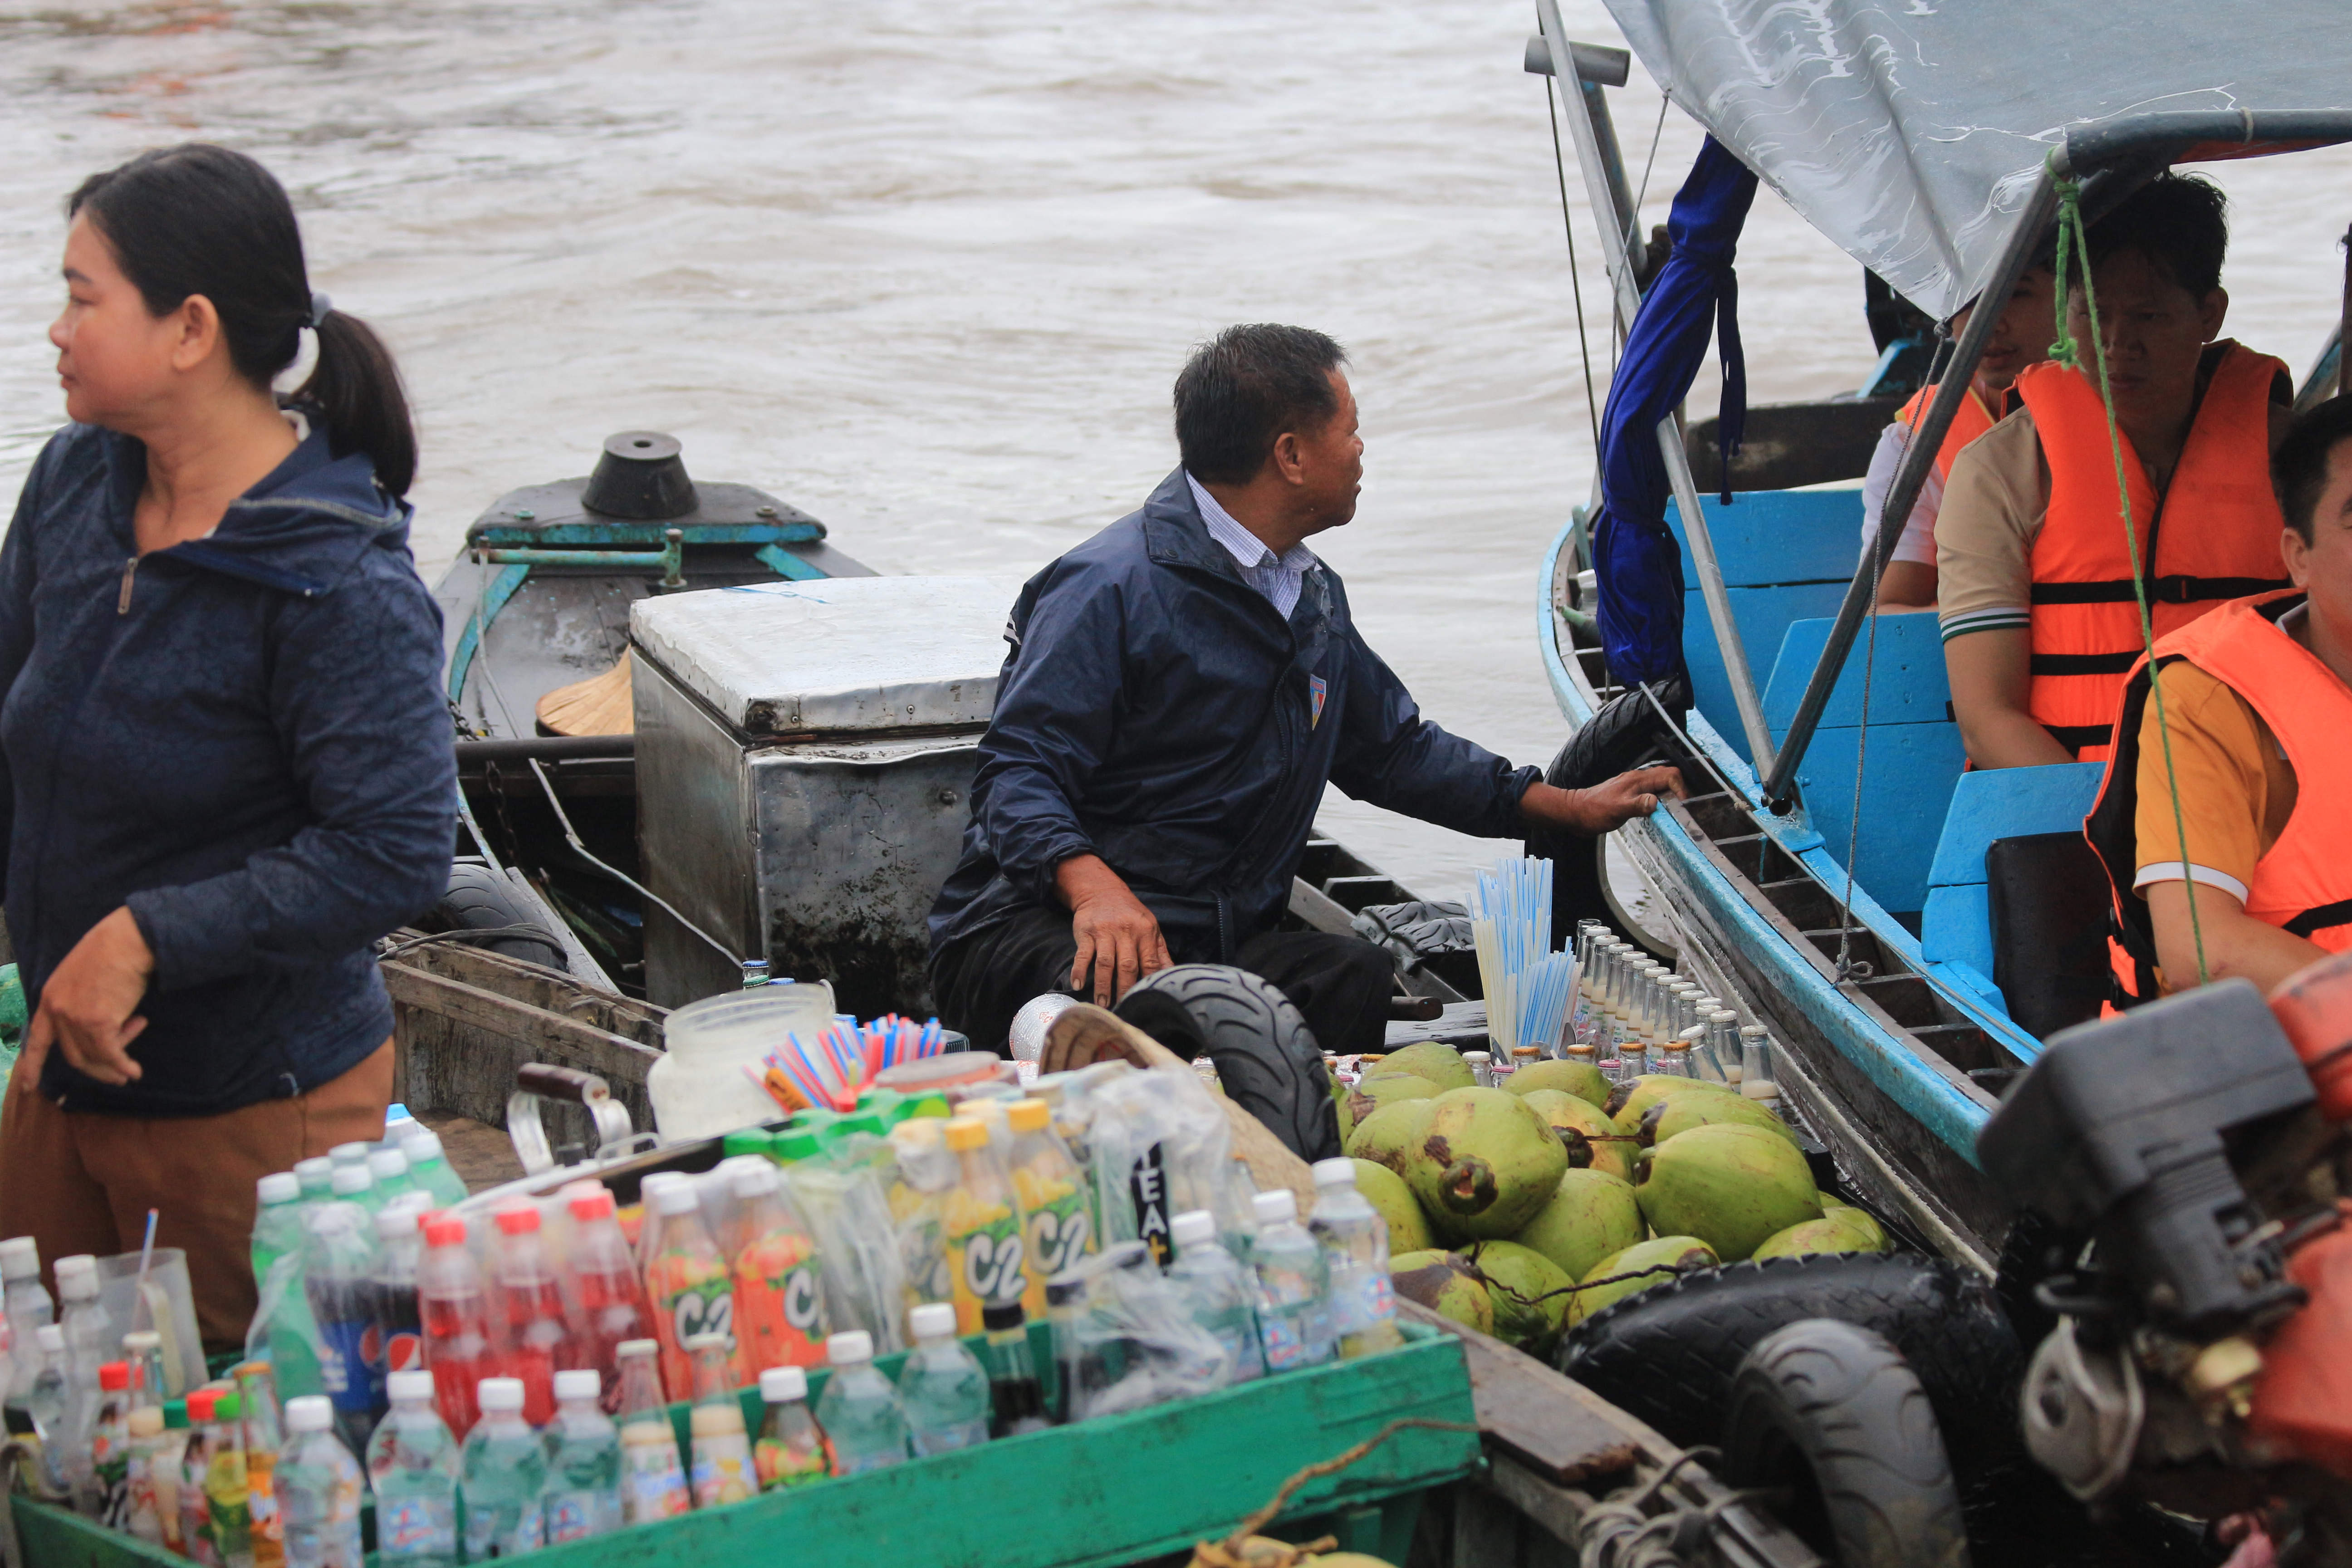 A man asks tourists to buy beverages while they are visiting the Cai Rang Floating Market in Can Tho City, southern Vietnam. Photo: Ray Kuschert / Tuoi Tre News